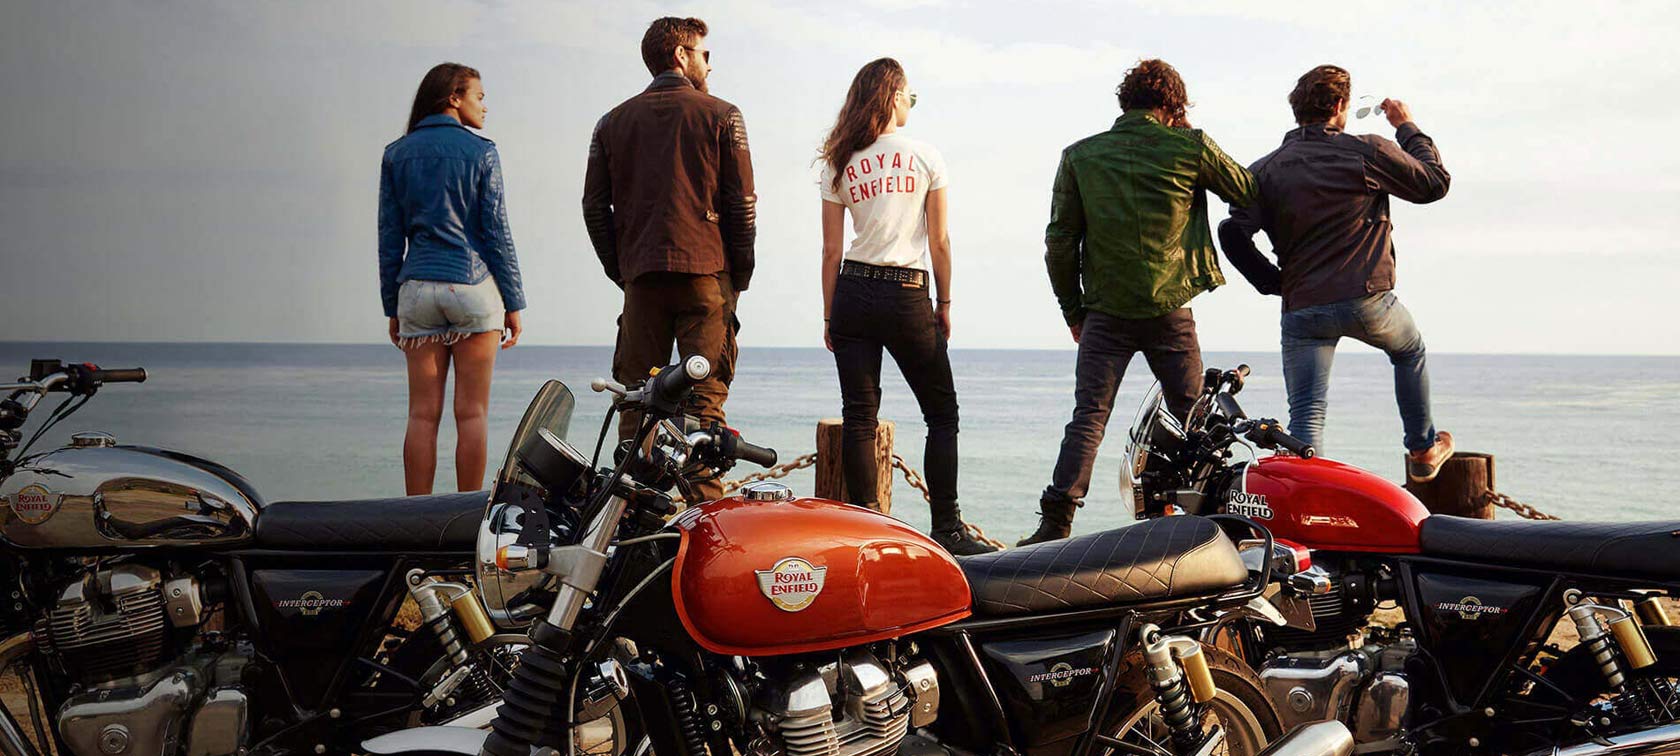 group of bikers with interceptors with beach background